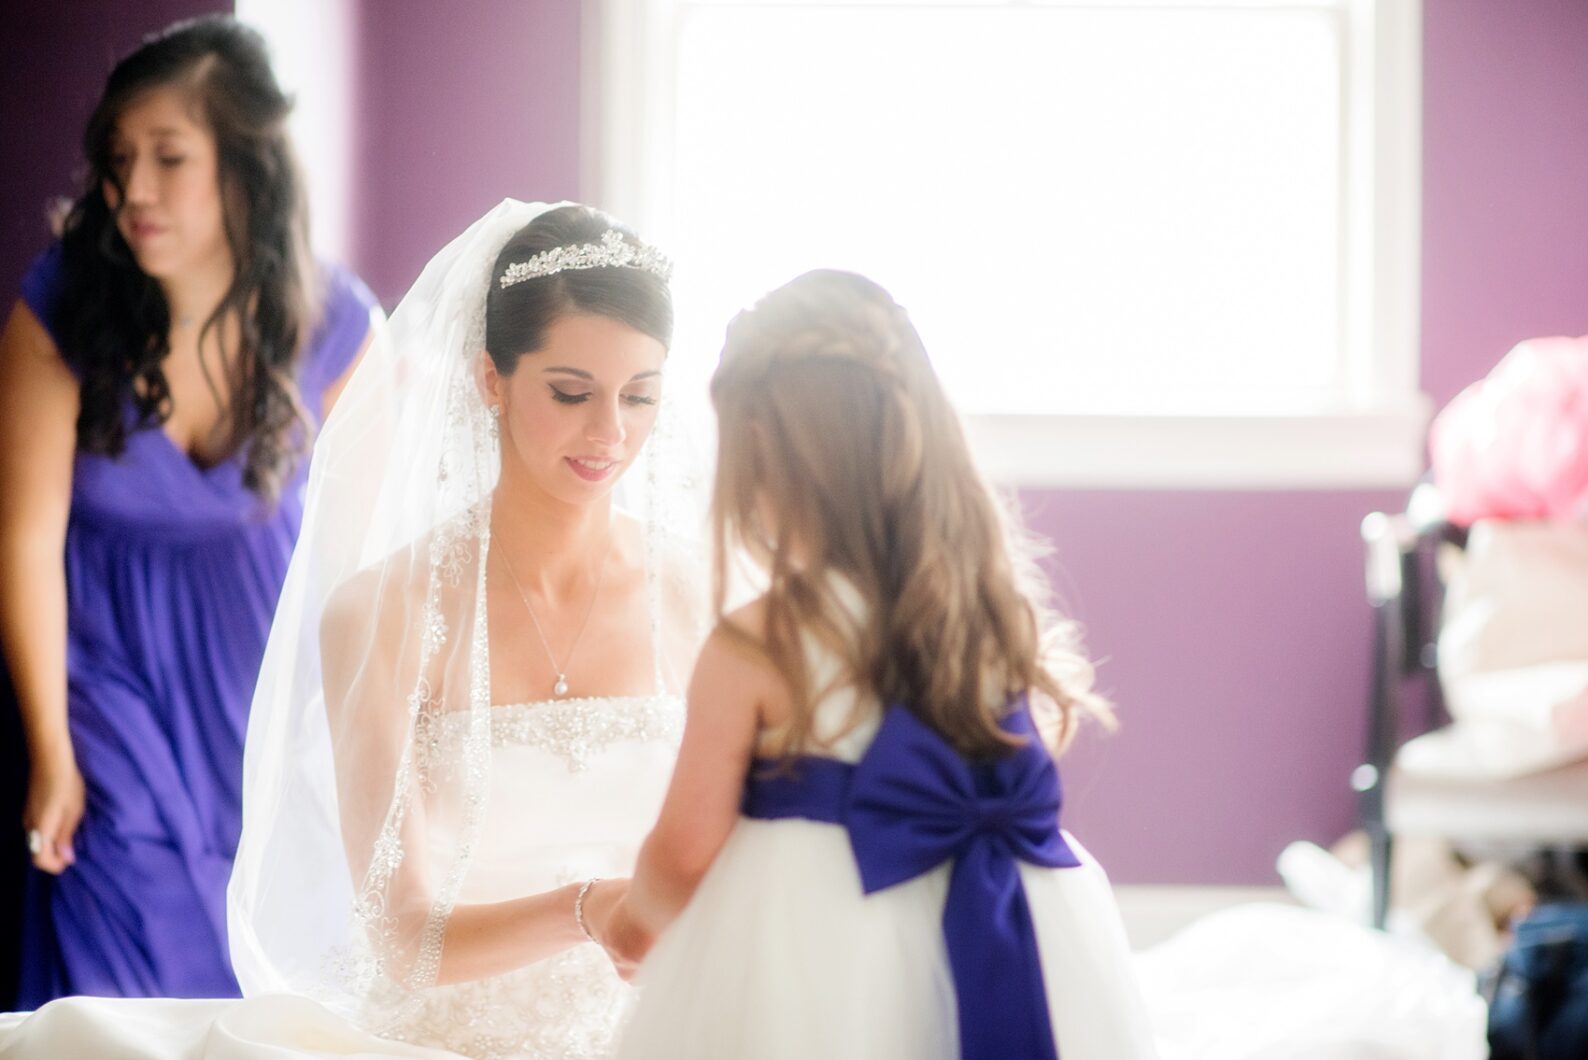 Mikkel Paige Photography wedding photos at The Fox Hollow, Long Island. A candid photo of the bride giving her flower girl a gift.